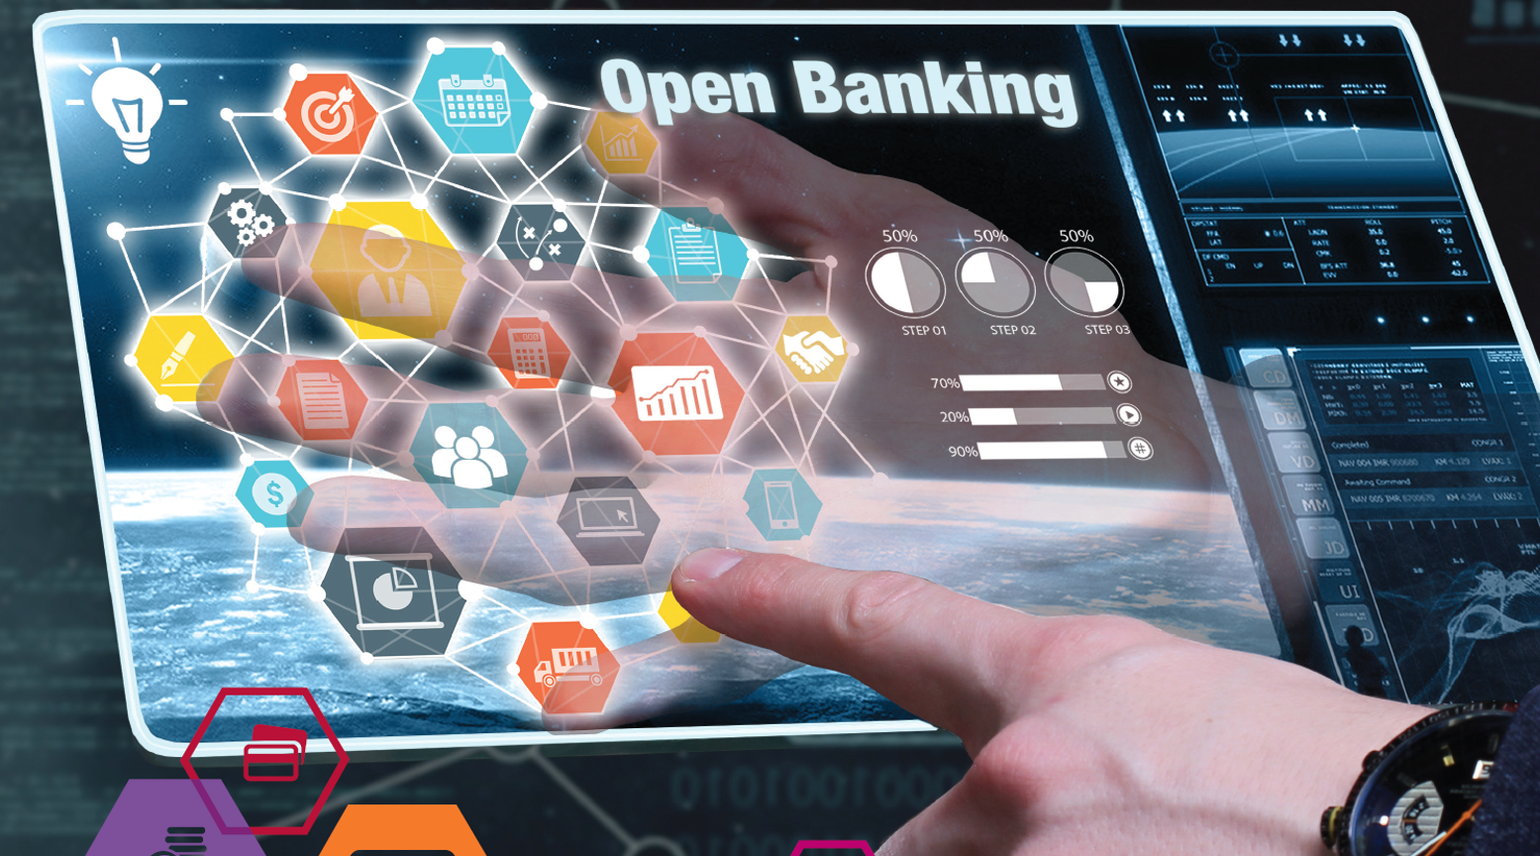 rsz_1open_banking